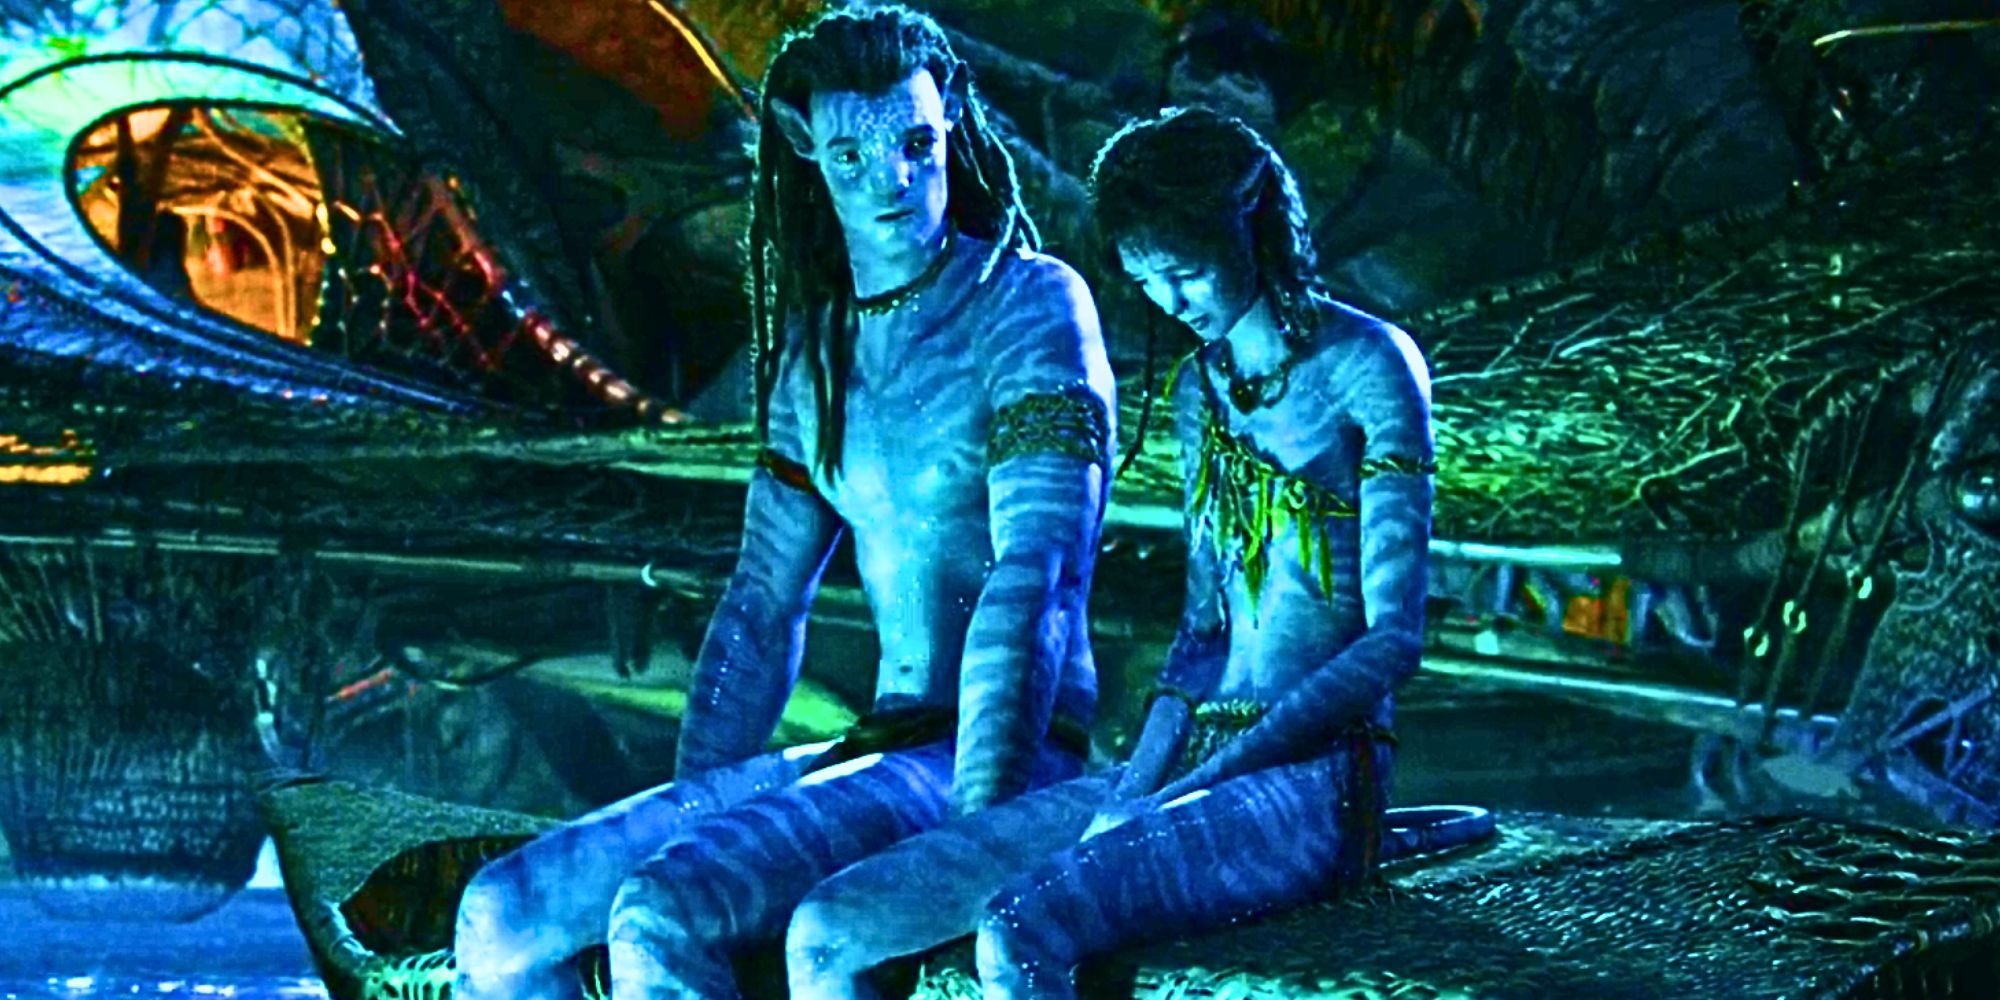 Jake and Kiri sitting by the water looking sad in Avatar: The Way of Water